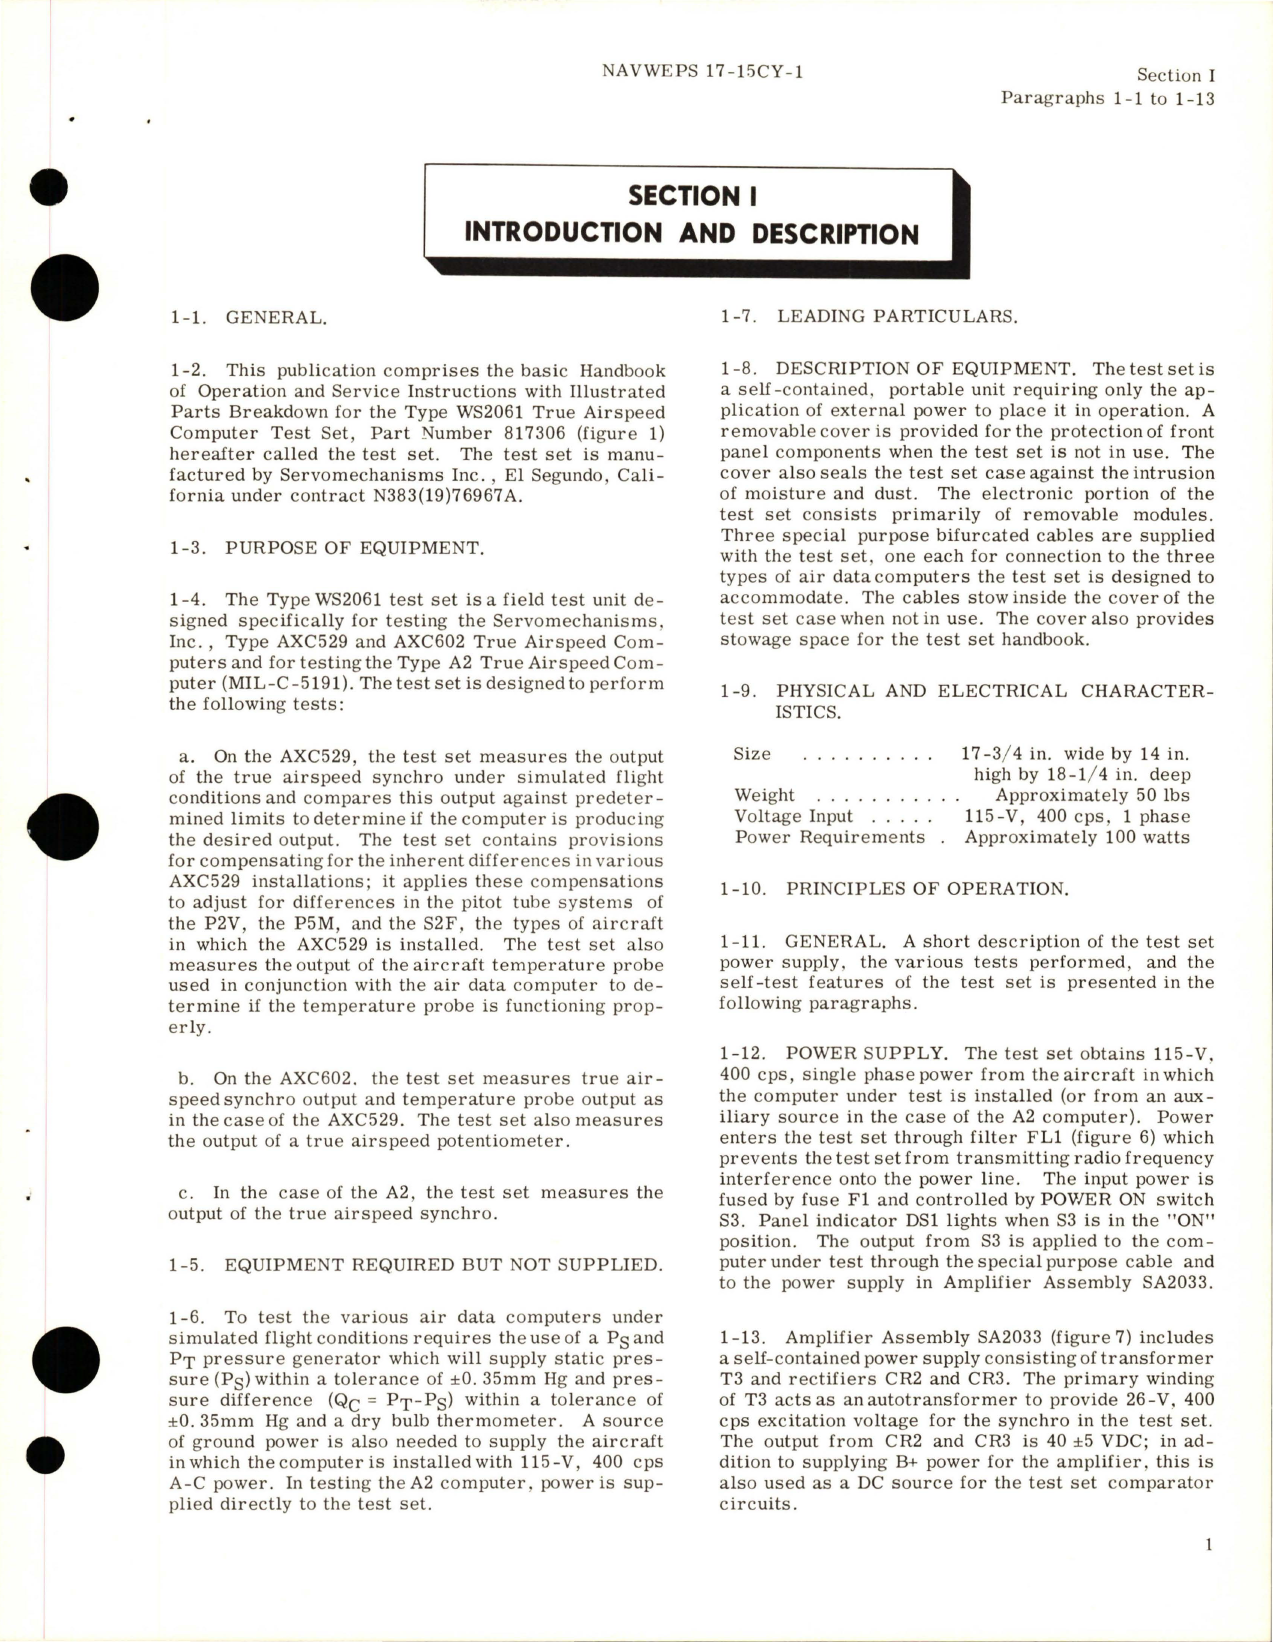 Sample page 5 from AirCorps Library document: Operation and Service Instructions with Illustrated Parts for True Airspeed Computer Test Set - Type WS2061 - Part 817306